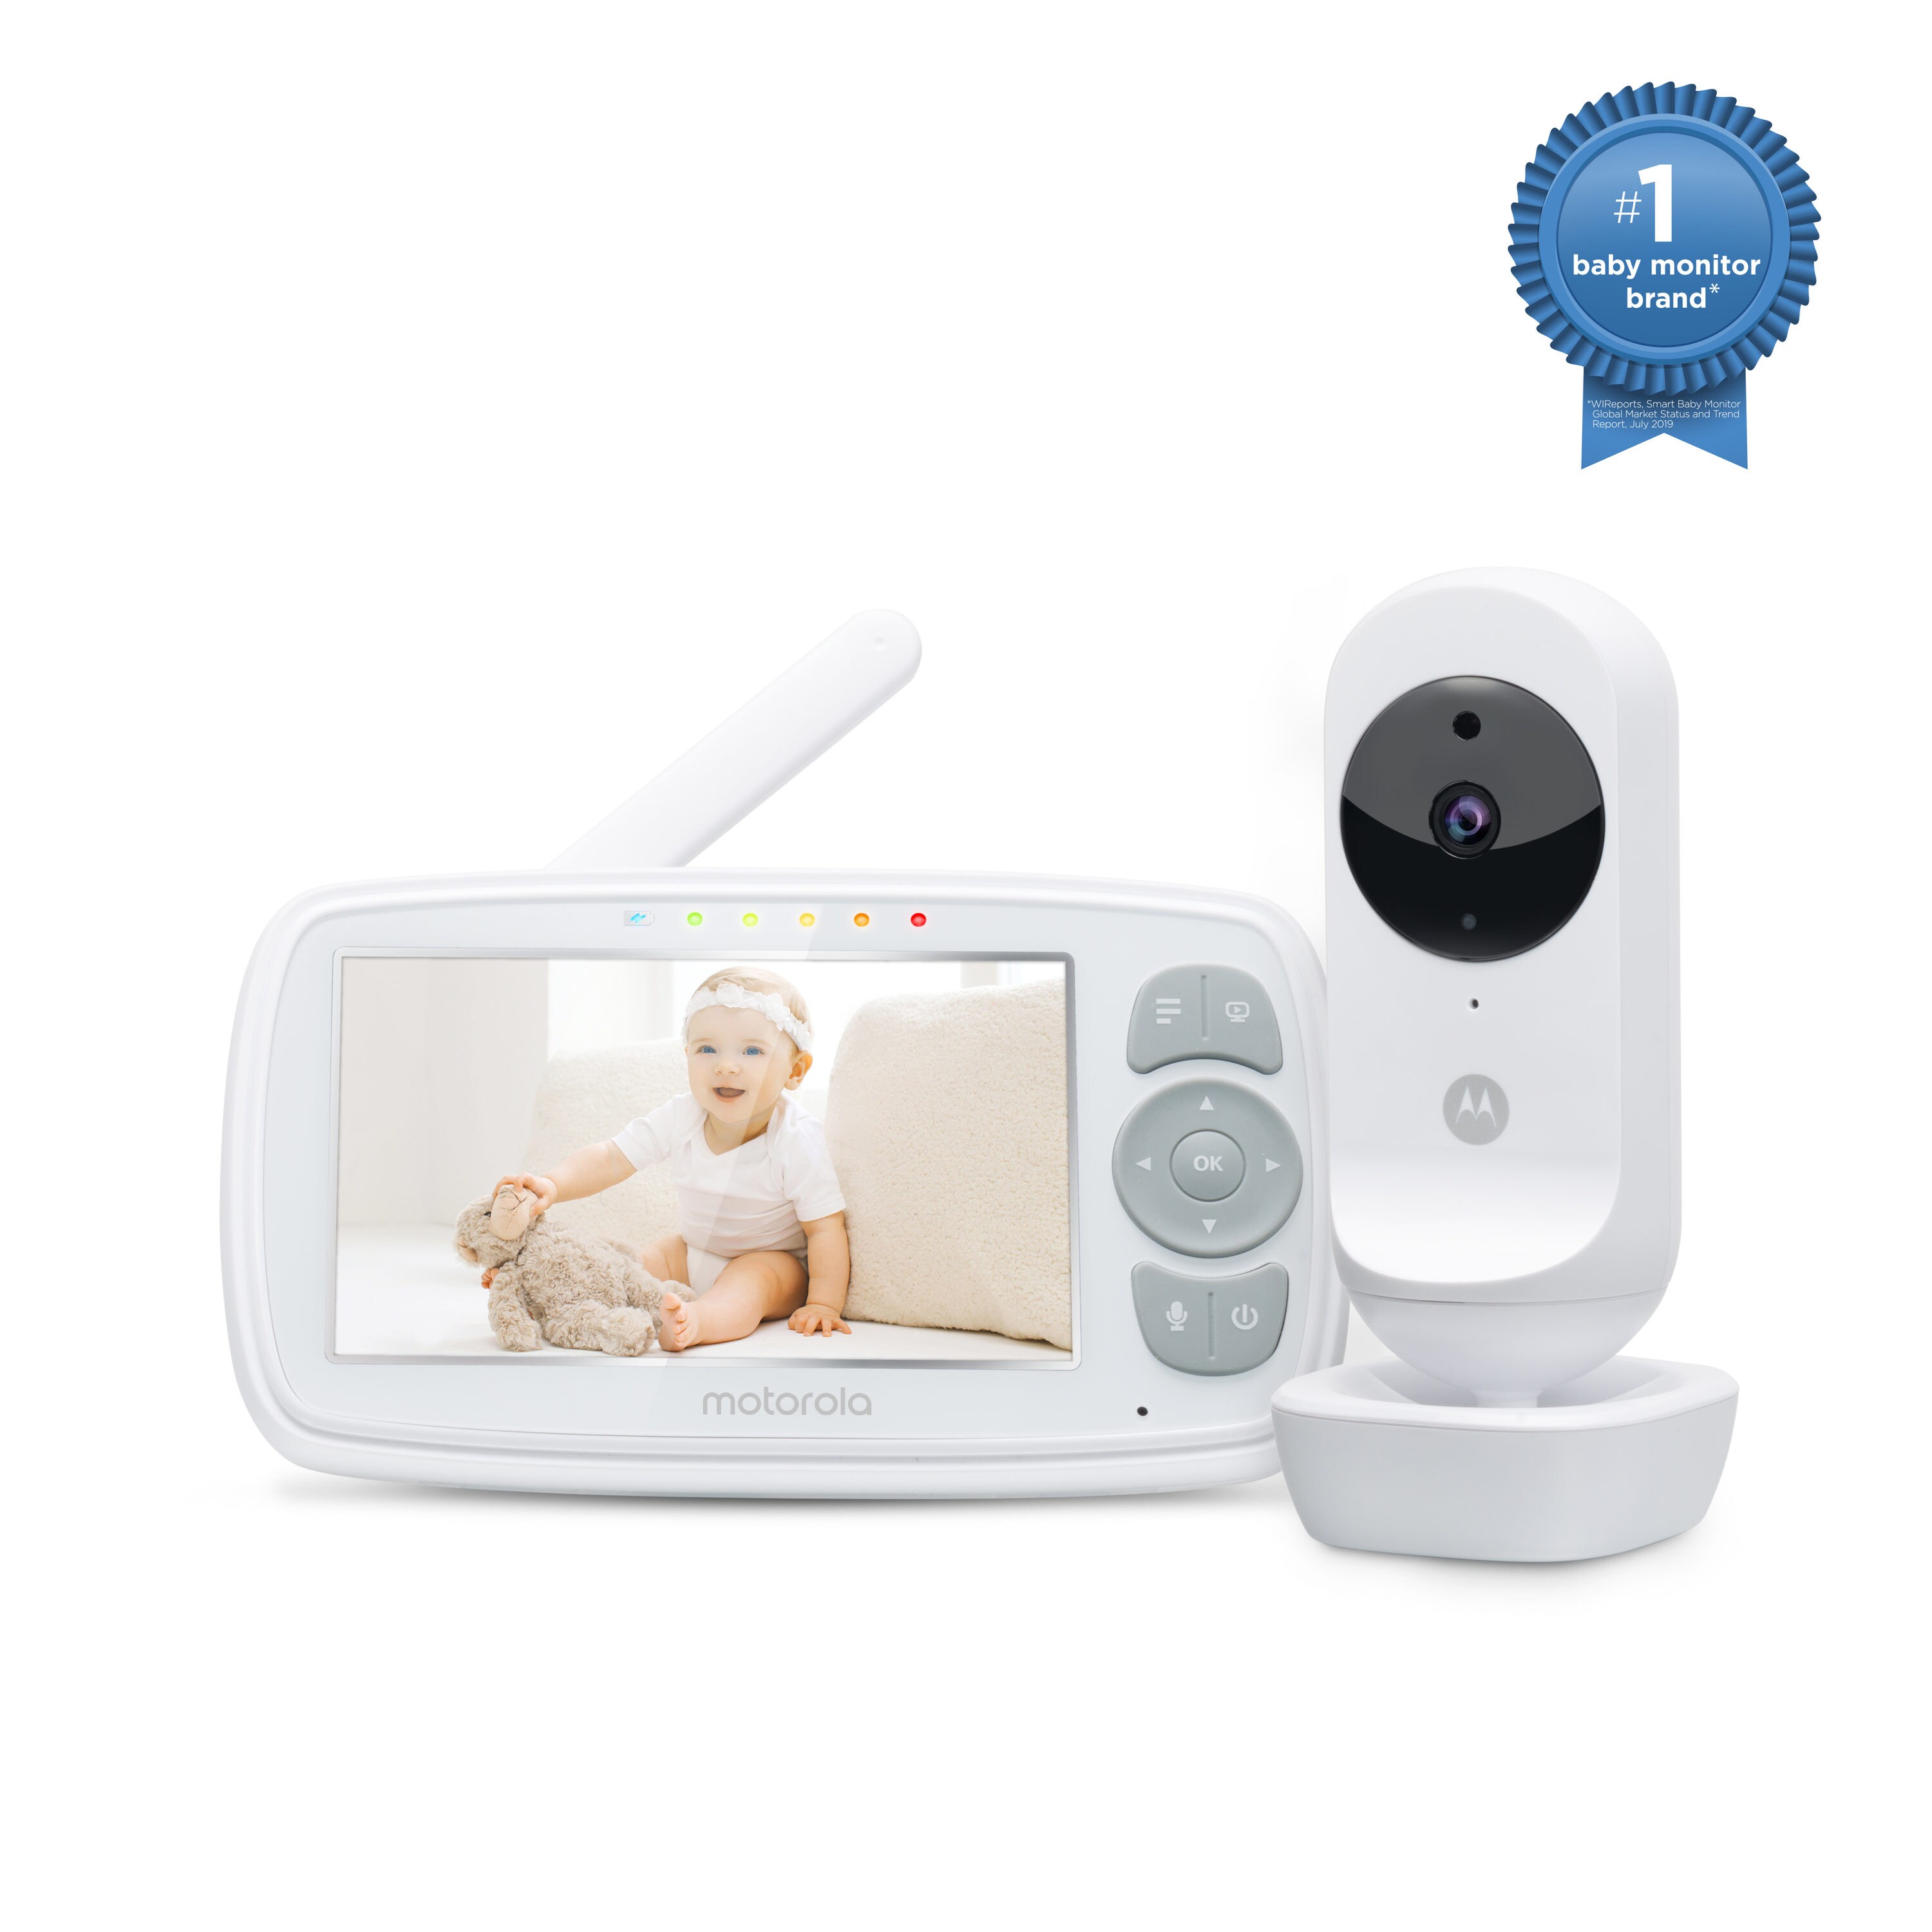 Vava Video Baby Monitor Review: Baby Monitor With Great Night Vision